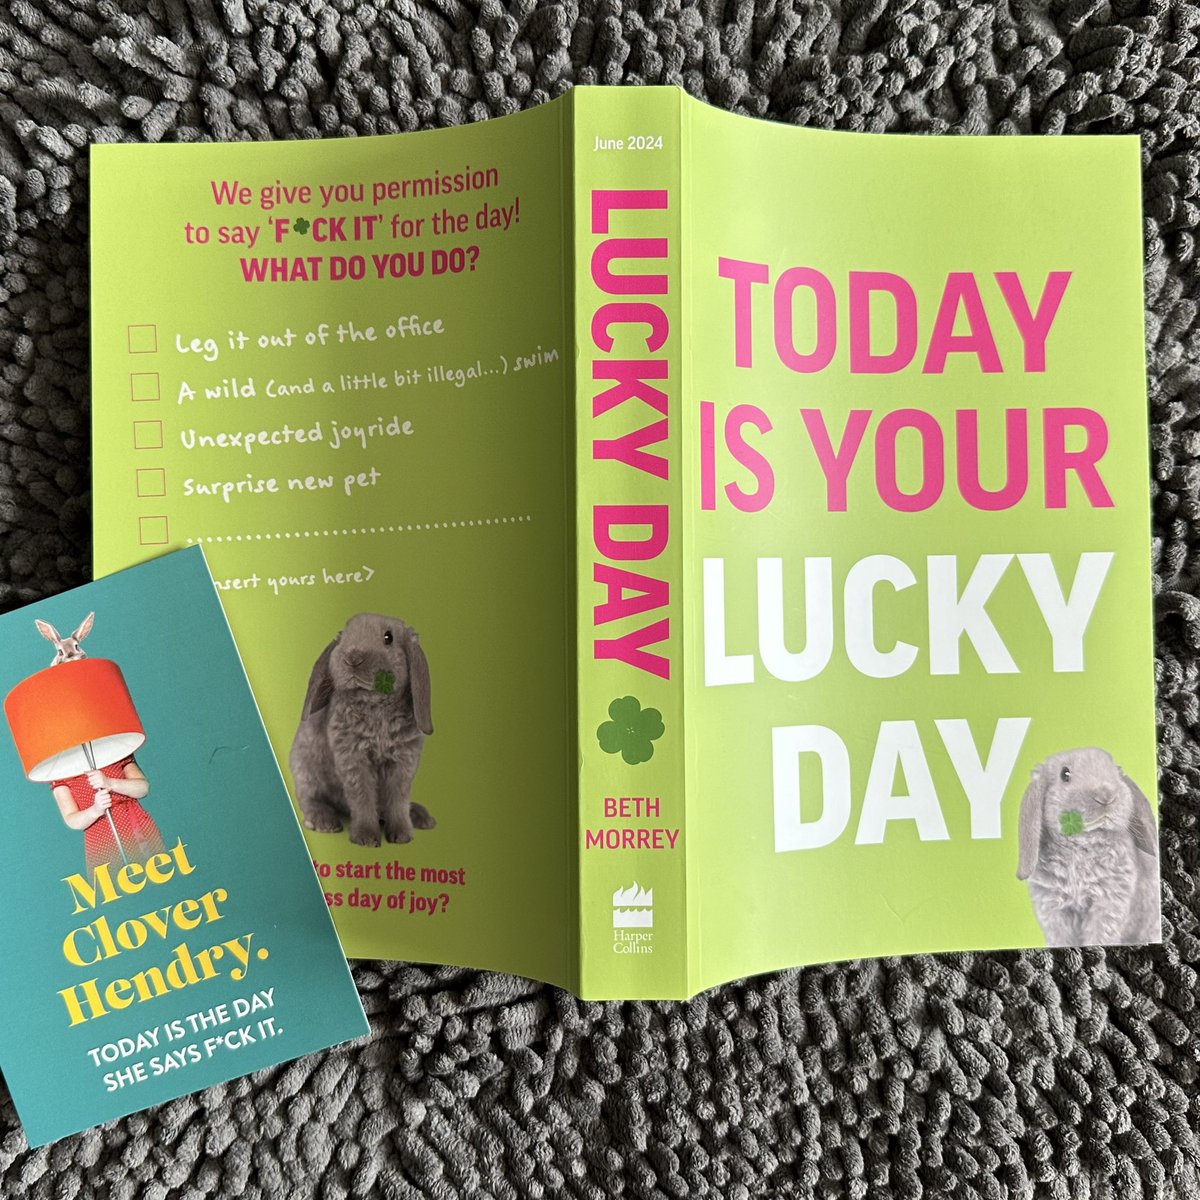 📚📮#BookPost📚📮 What would you do if you were given permission to say F☘️ck It for the day to everything? What would you do??? Clover Hendry gets exactly this chance in #LuckyDay by @BethMorrey Thank you to @HarperFiction for sending this proof 📖 #BookTwitter #Bookblogger